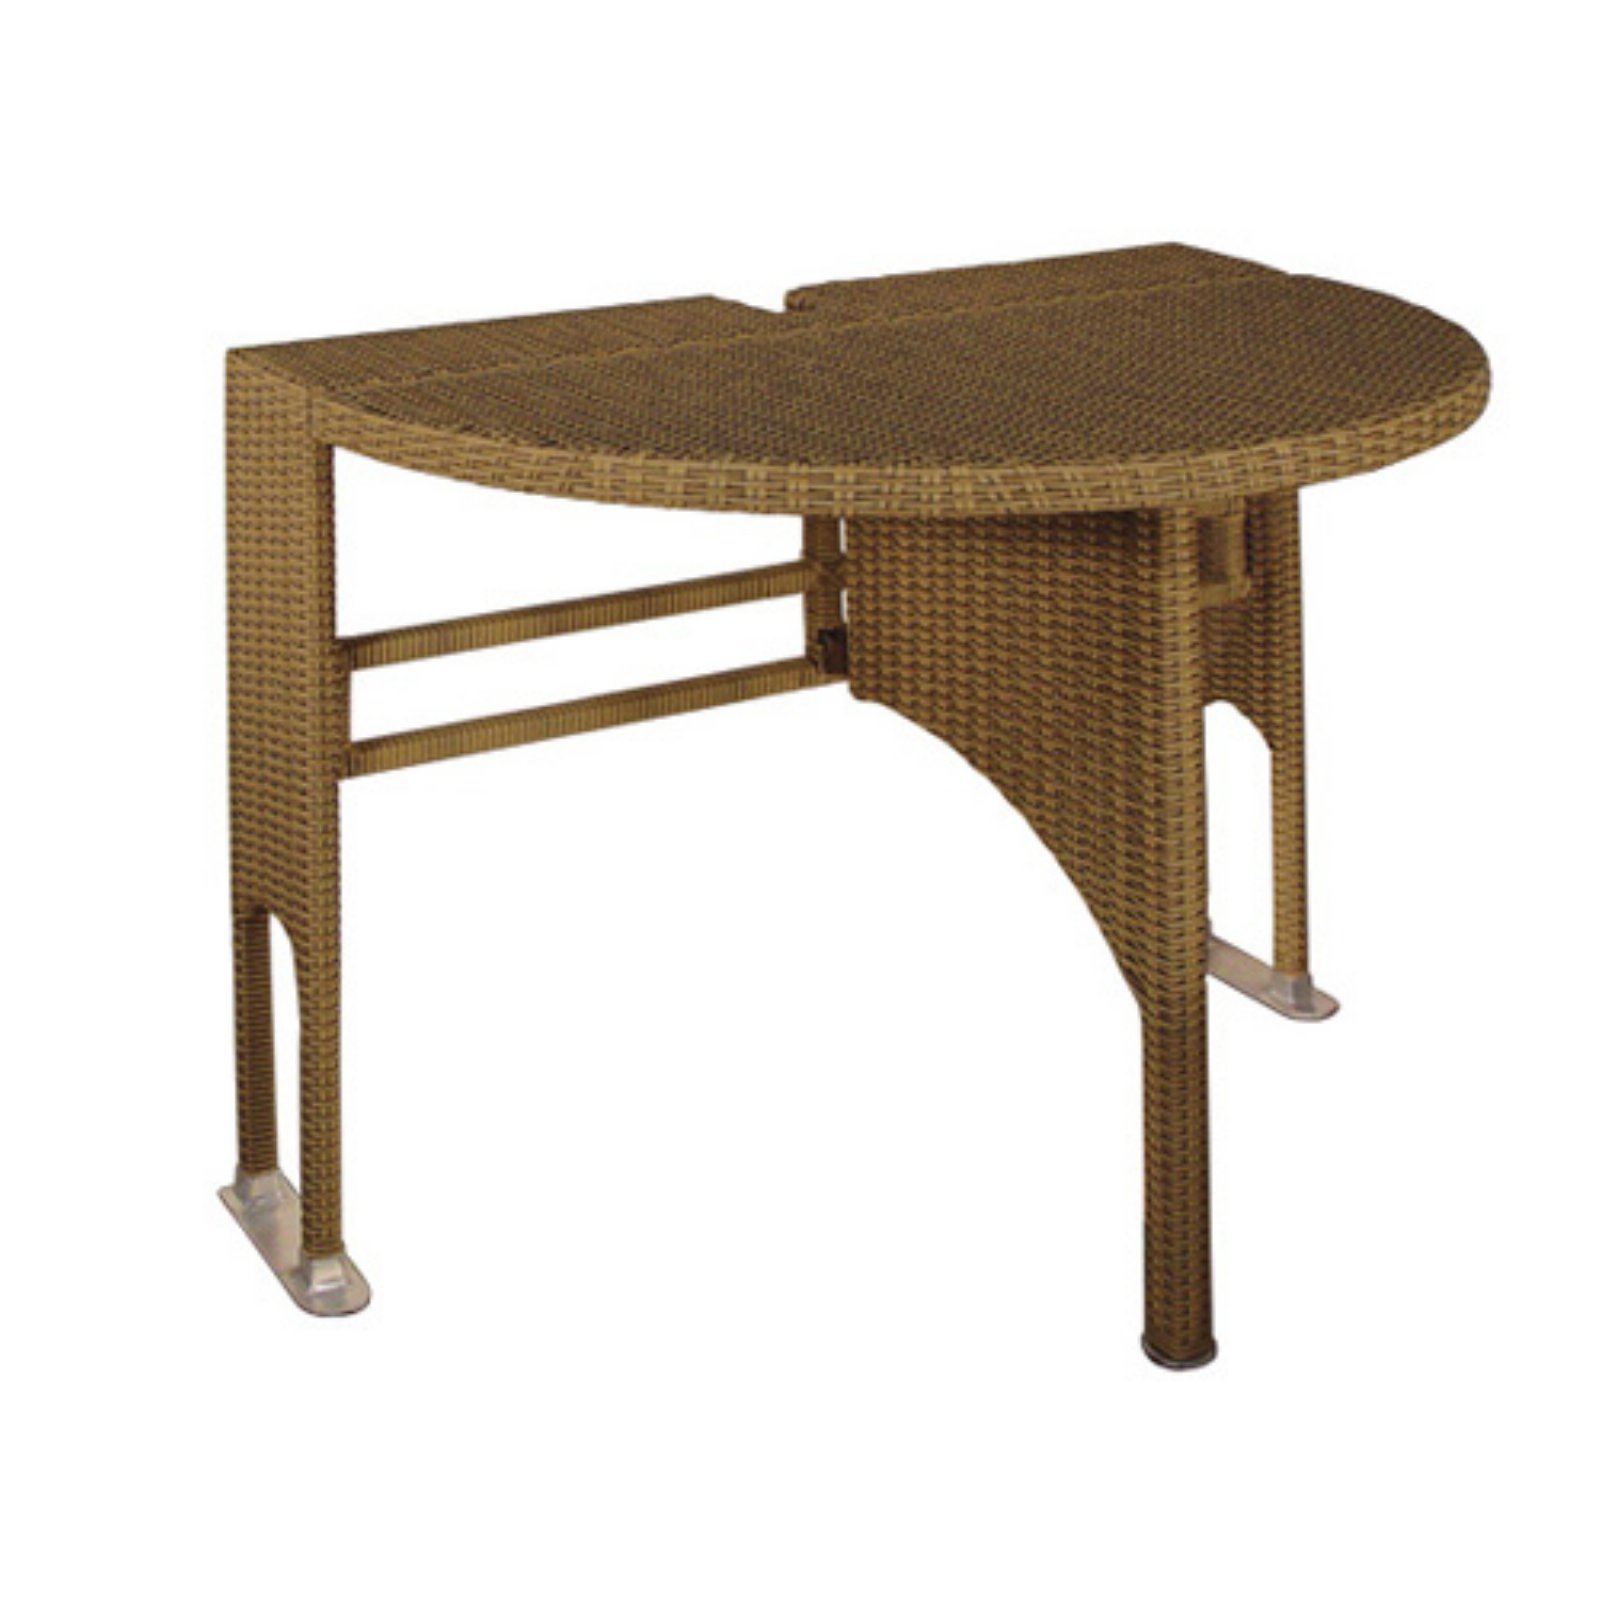 TERRACE MATES ADENA All-Weather Wicker Coffee Color Table Set w/ 7.5'-Wide OFF-THE-WALL BRELLA - Natural Olefin Canopy - image 5 of 11